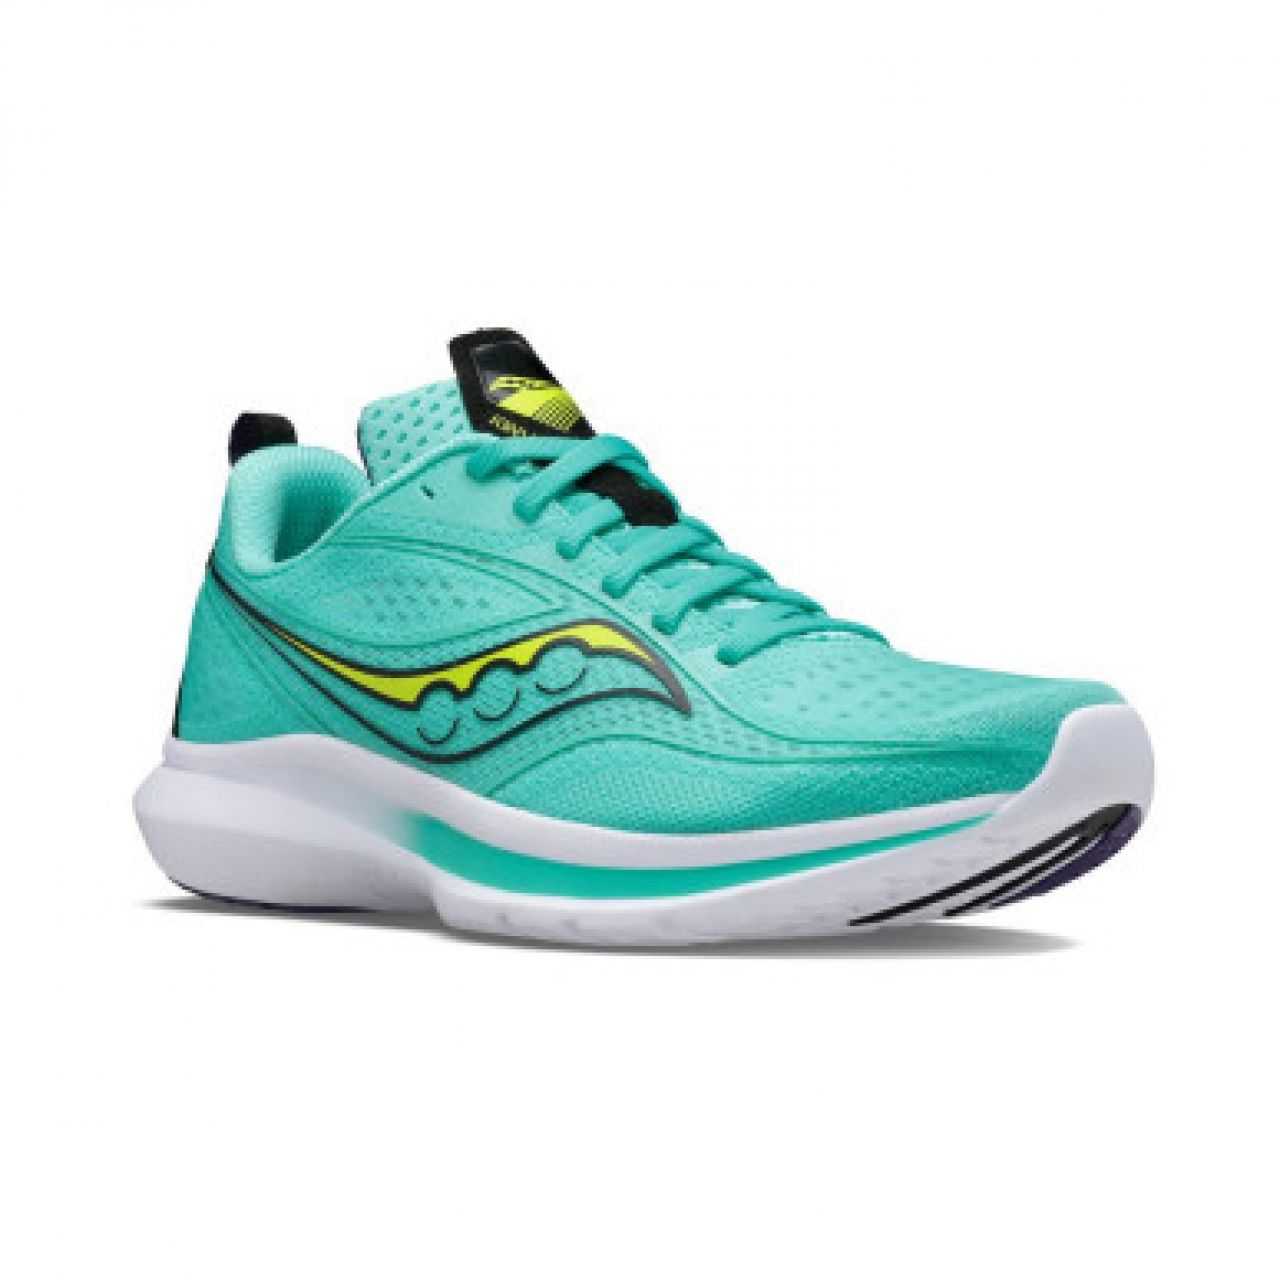 SAUCONY KINVARA 13 COOL MINT Chaussures running saucony